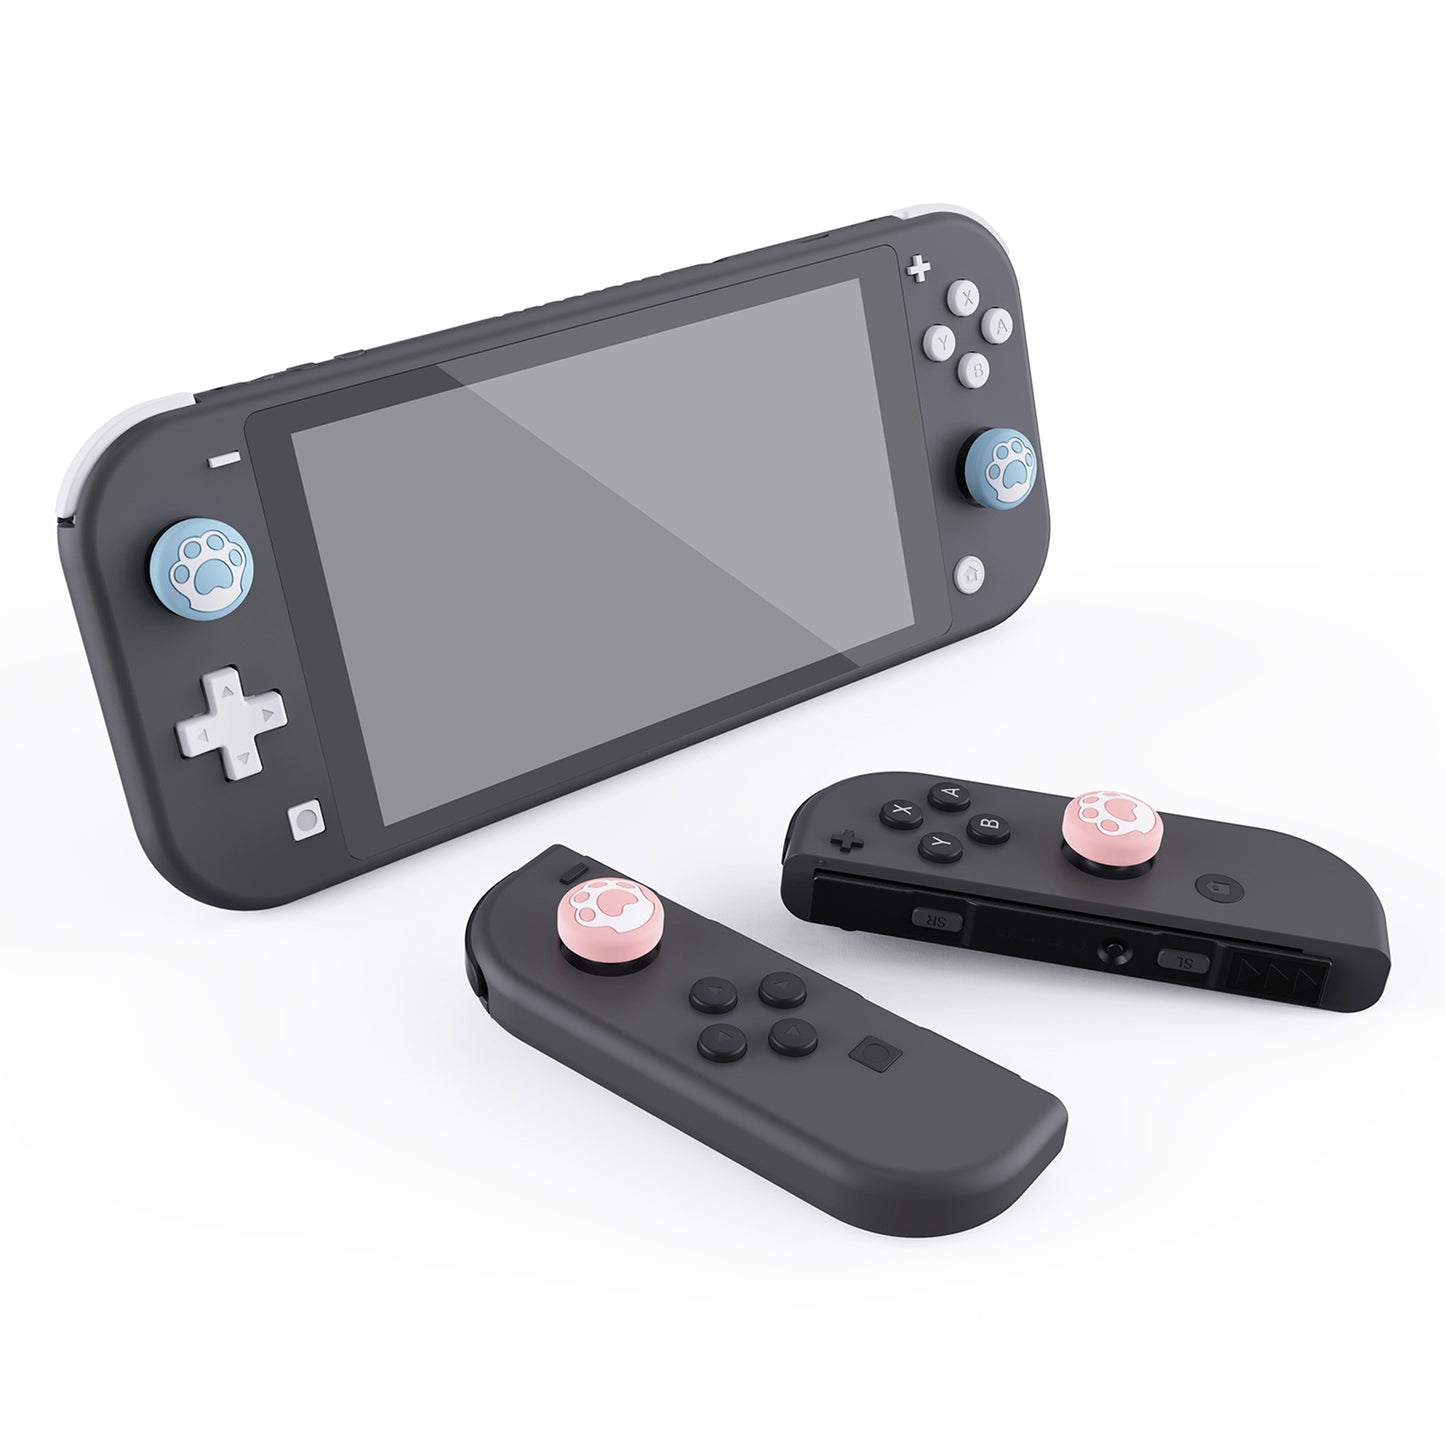 PlayVital Cat Paw Cute Switch Thumb Grip Caps, Joystick Caps for Nintendo Switch Lite, Silicone Analog Cover Thumb Stick Grips for Joy-Con Controller - Heaven Blue & Pale Red - NJM1126 playvital